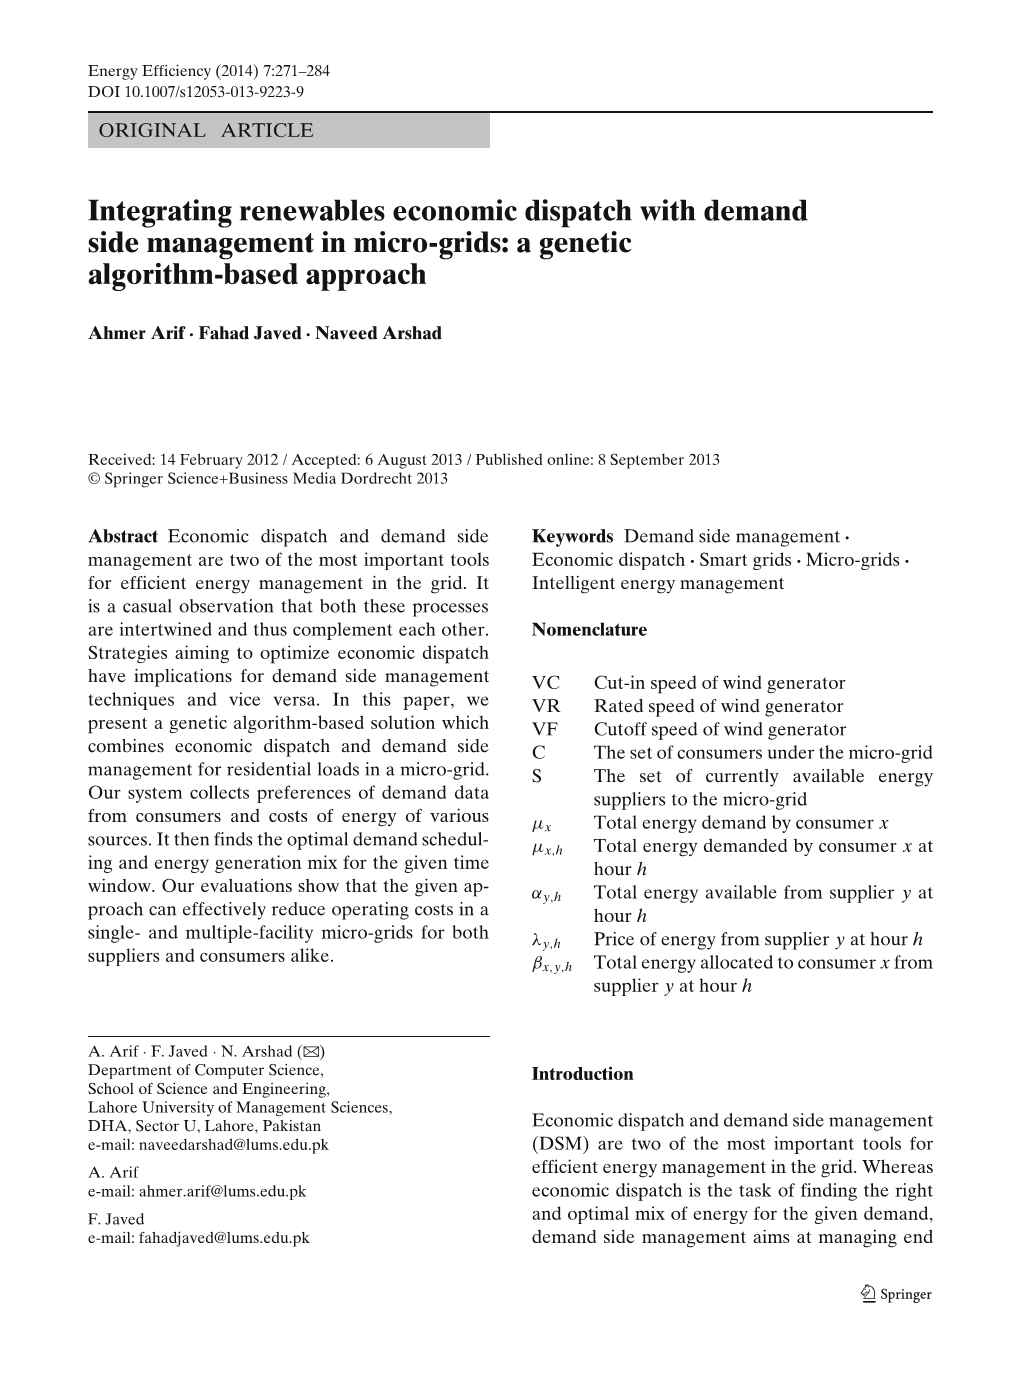 Integrating Renewables Economic Dispatch with Demand Side Management in Micro-Grids: a Genetic Algorithm-Based Approach